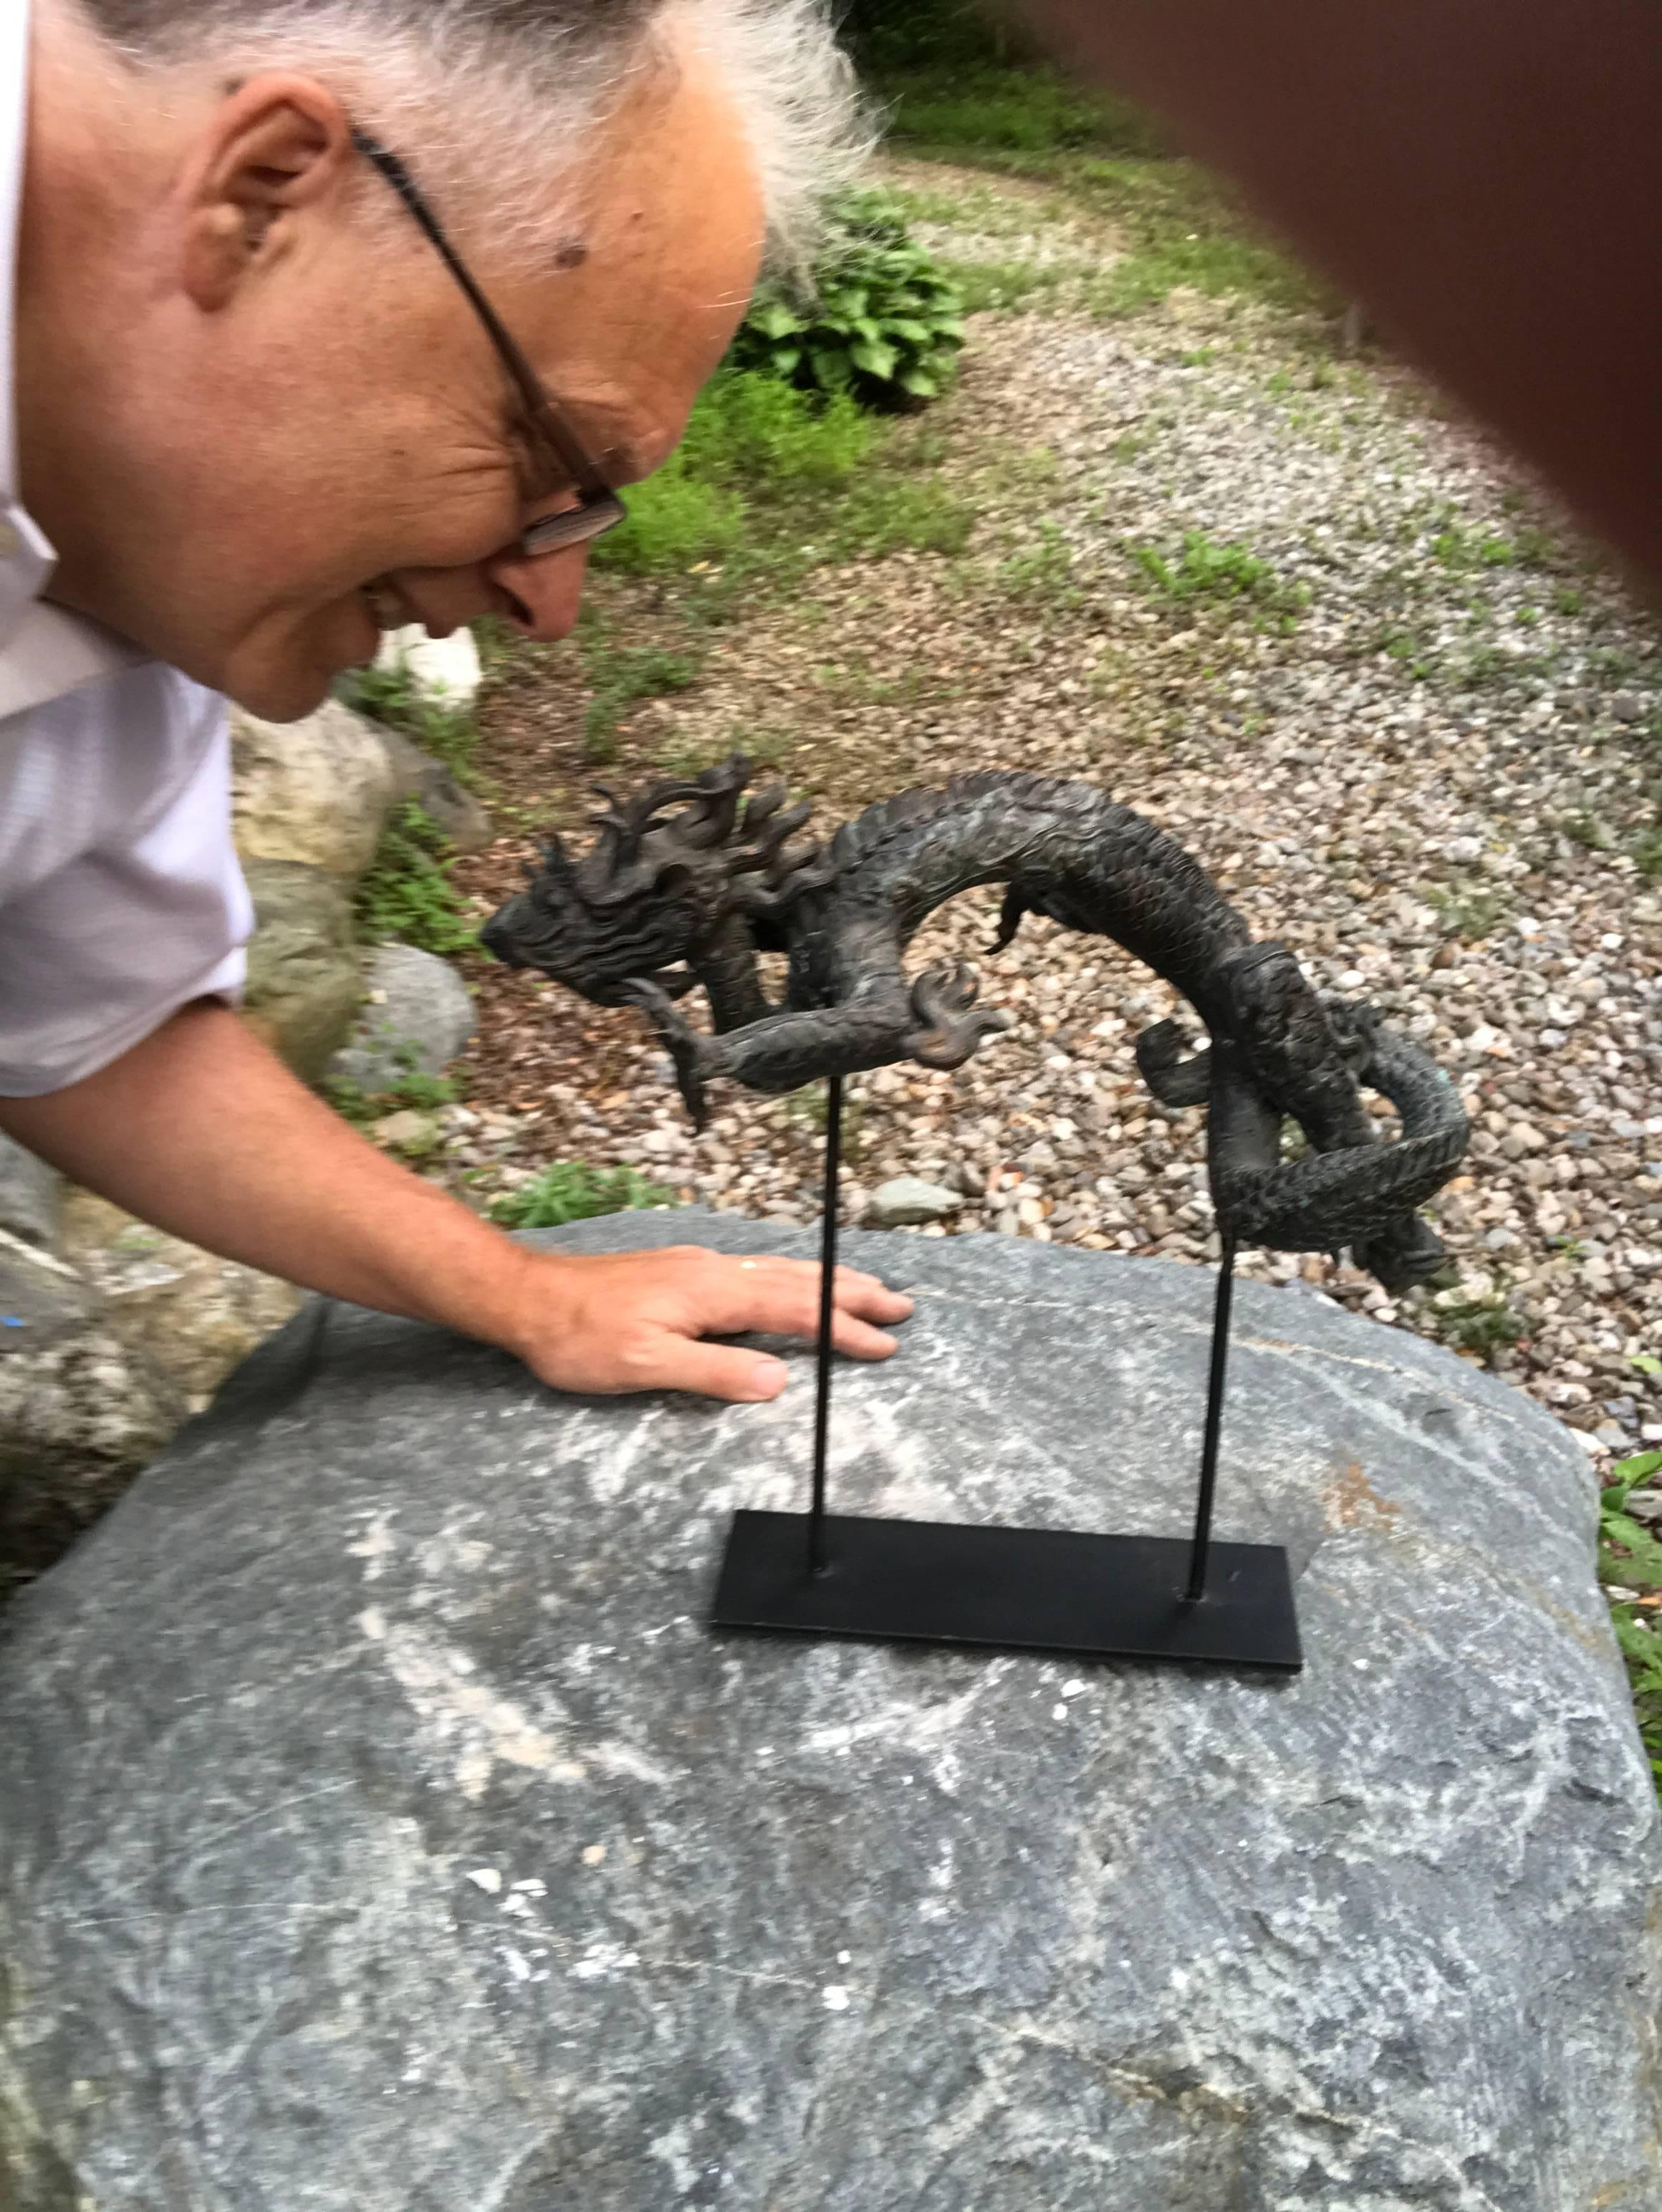 China, a rare hand caste, hand-wrought bronze antique  -5 claw-  dragon sculpture of a large writhing dragon. It possesses excellent detail.  Five claw dragons are associated with imperial works of art. 

We will include a custom metal display Stand